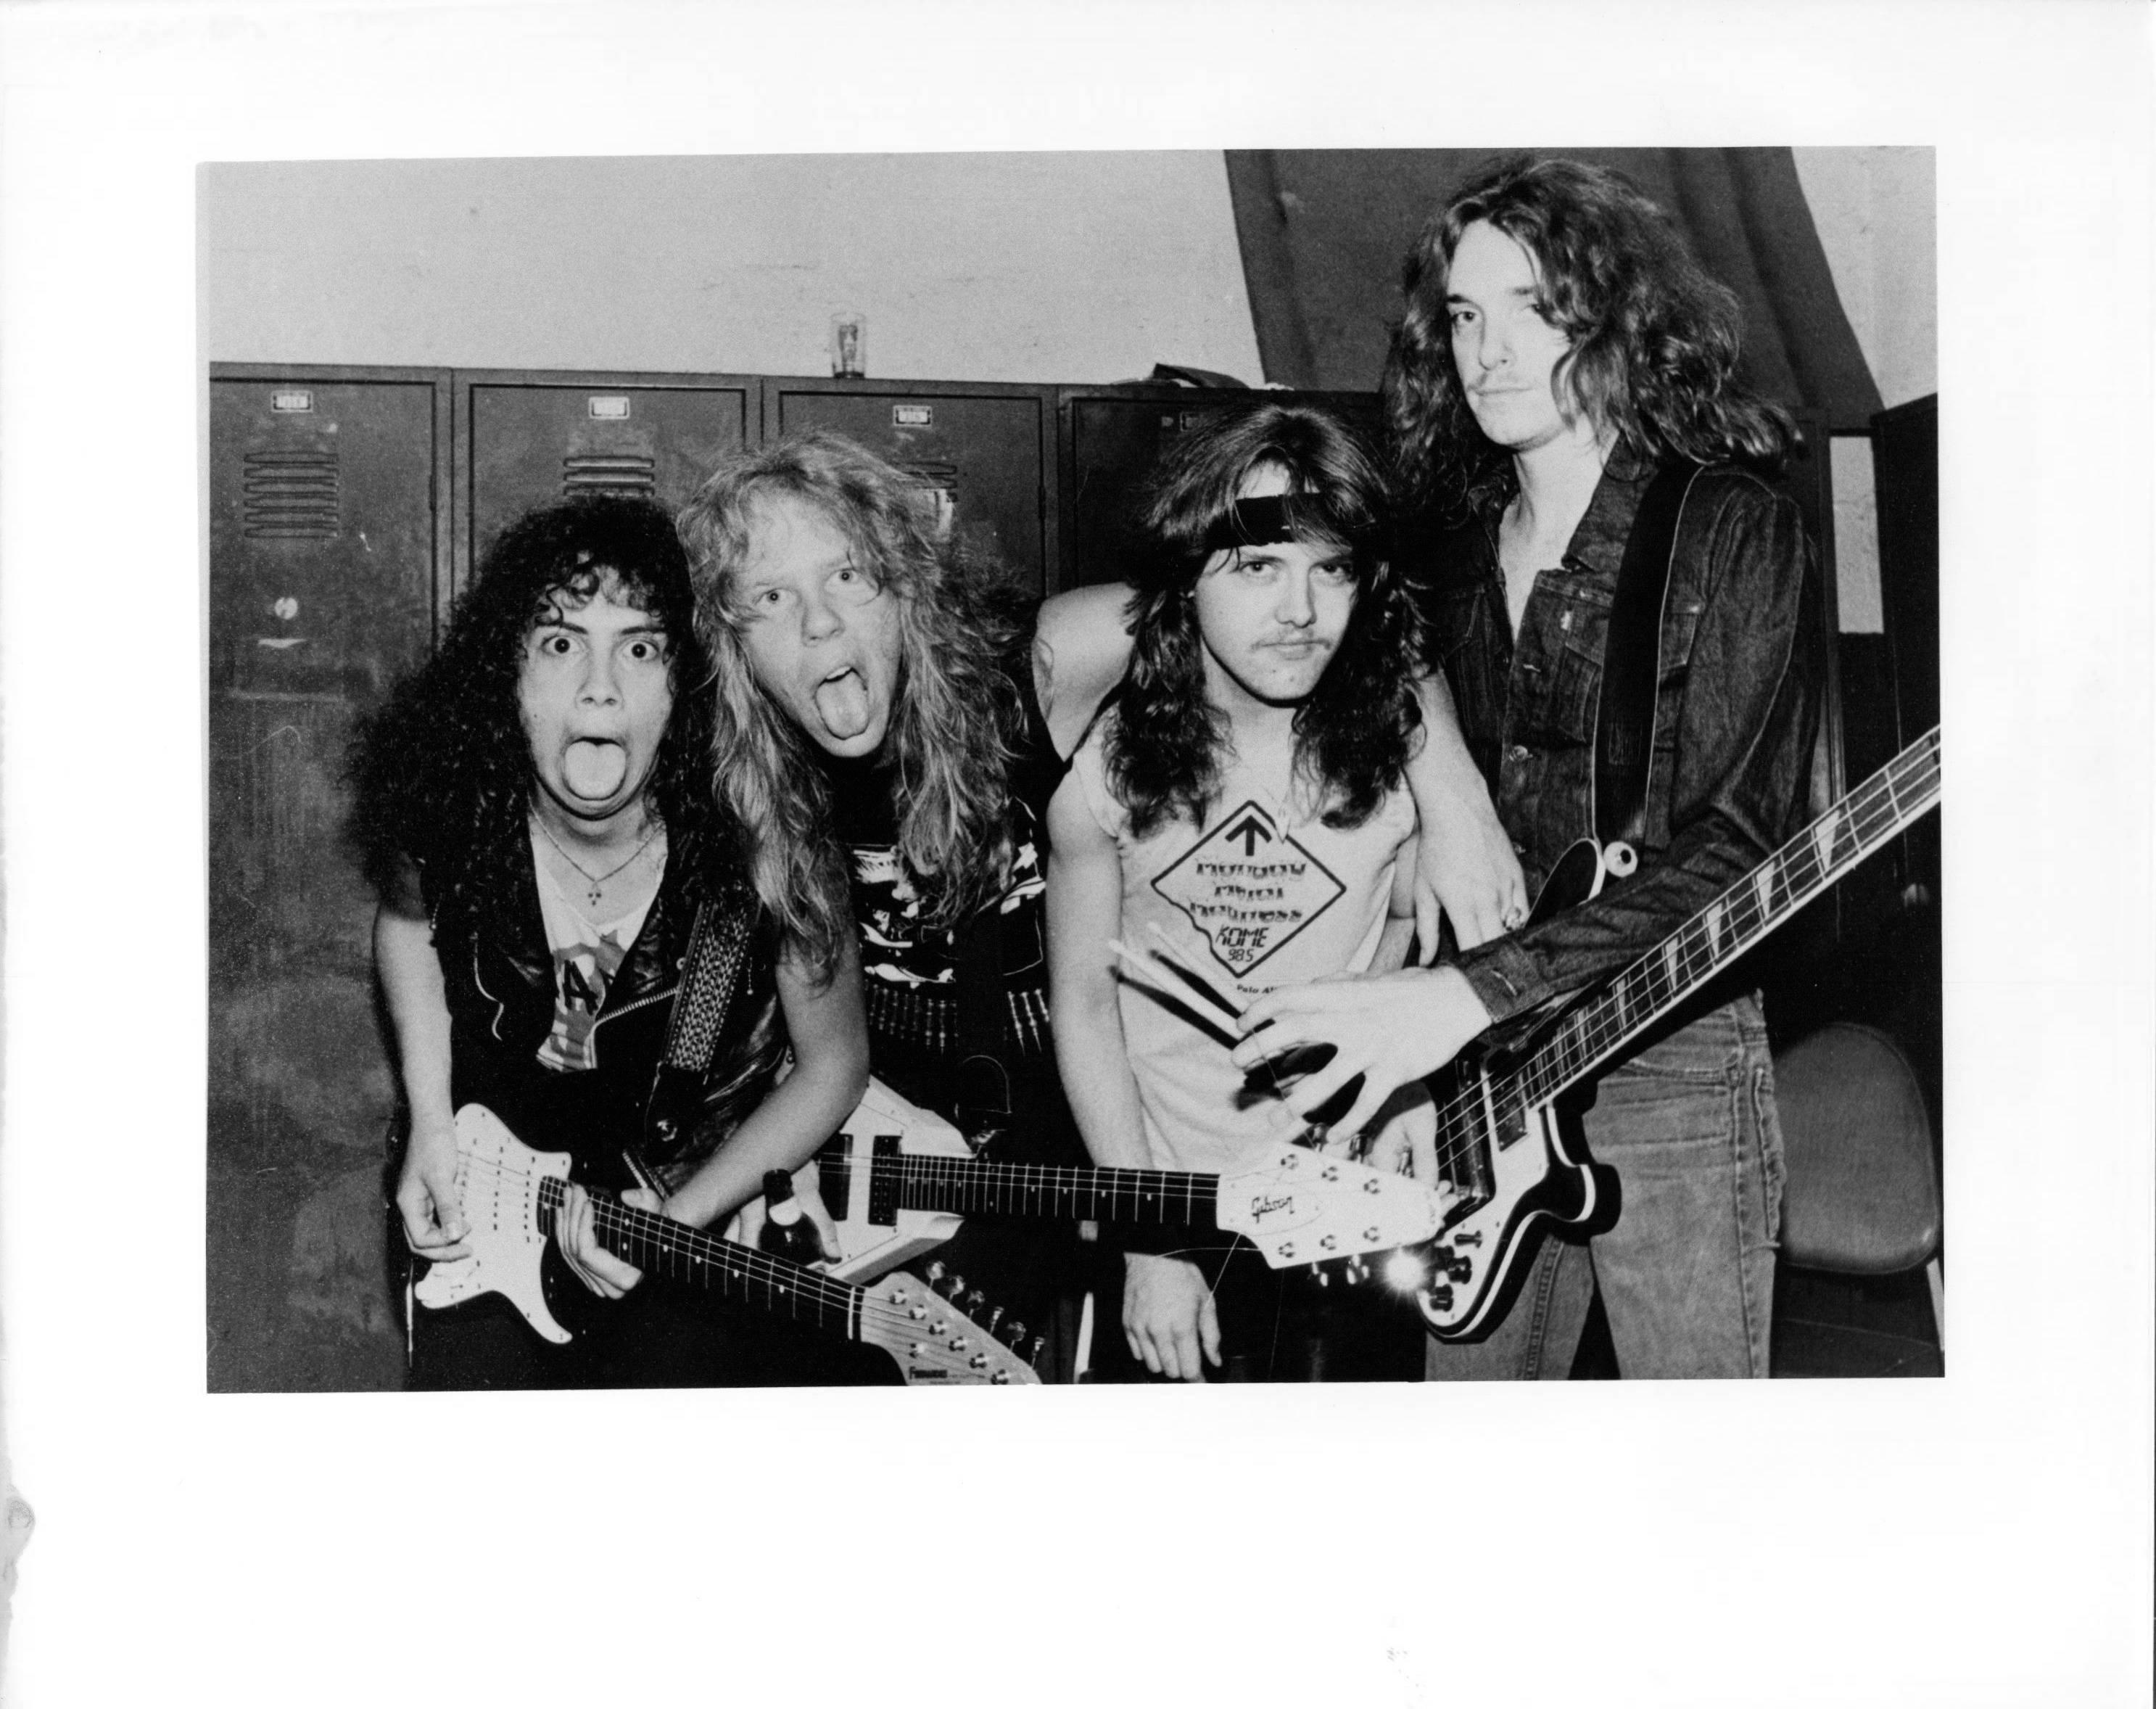 Robin Kaplan Black and White Photograph - Young Metallica with Tongues Out Vintage Original Photograph